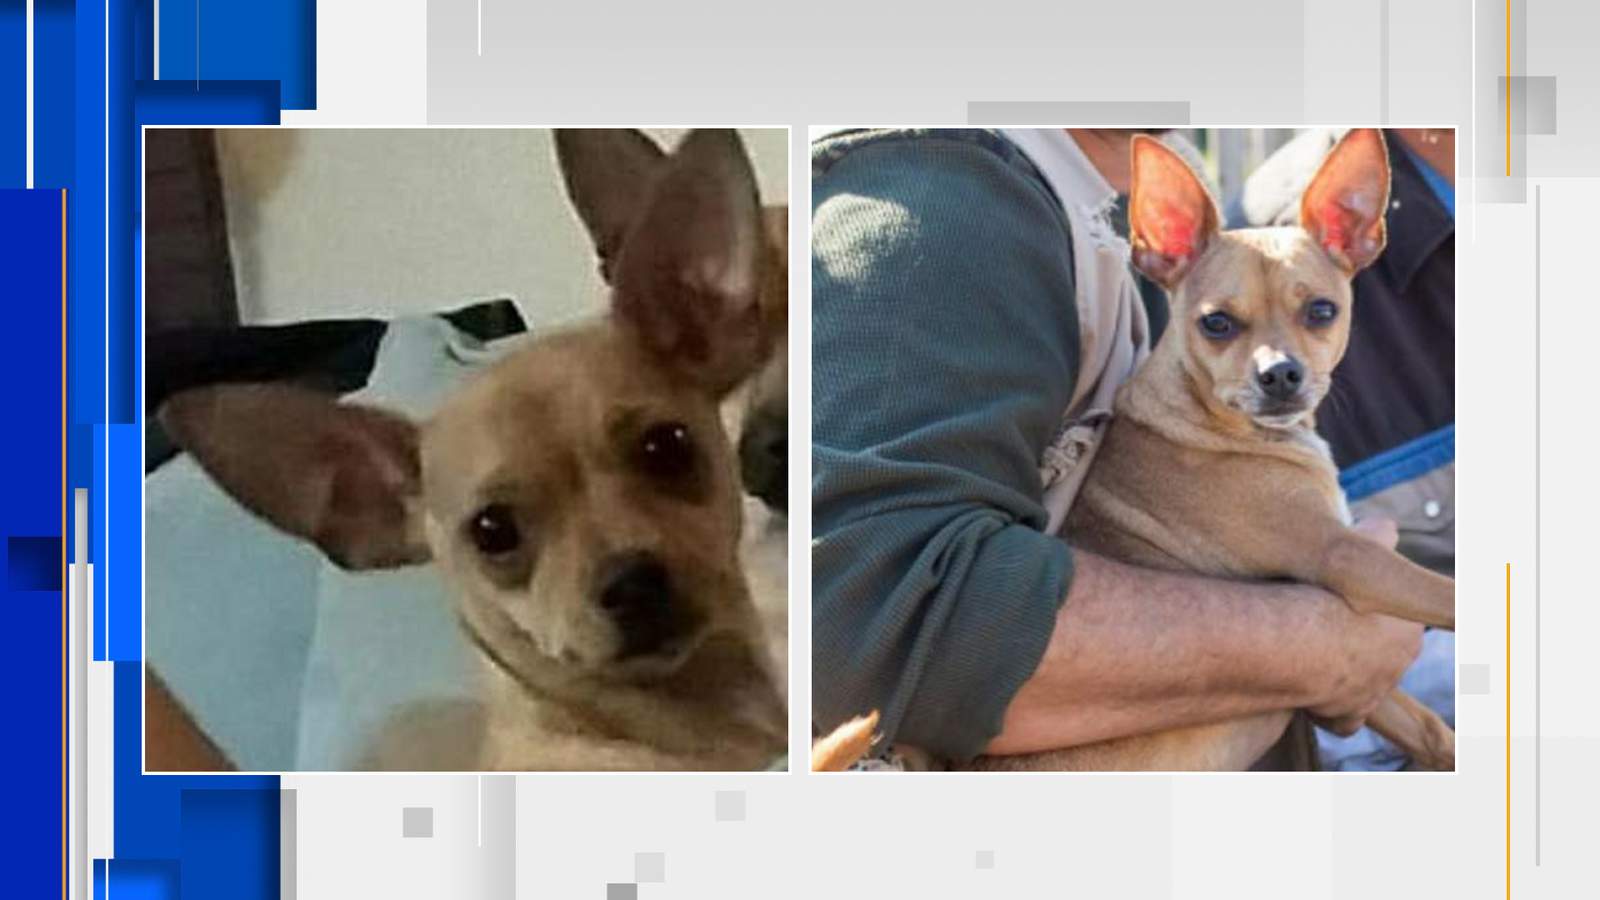 Missing Chihuahua reunited with family after New Year’s Eve car crash